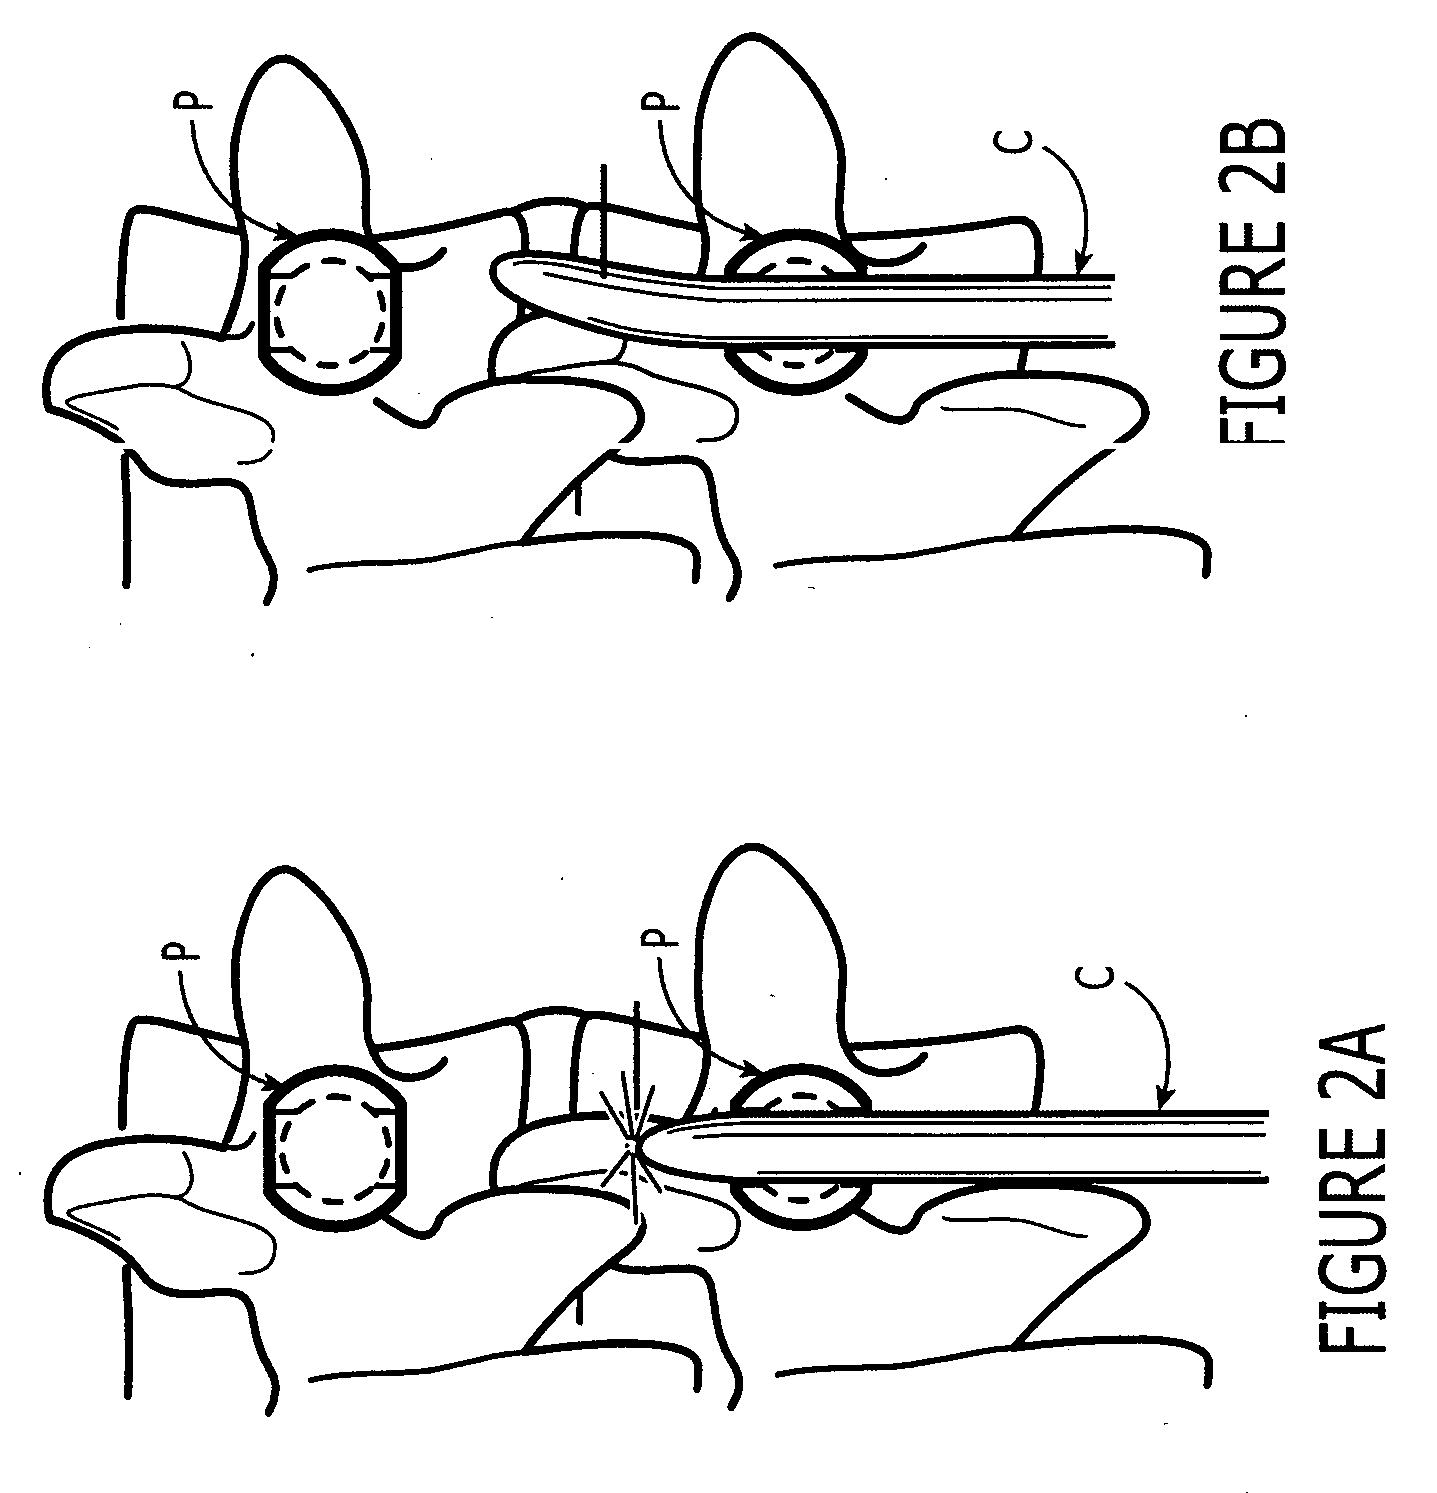 Rod delivery device and method